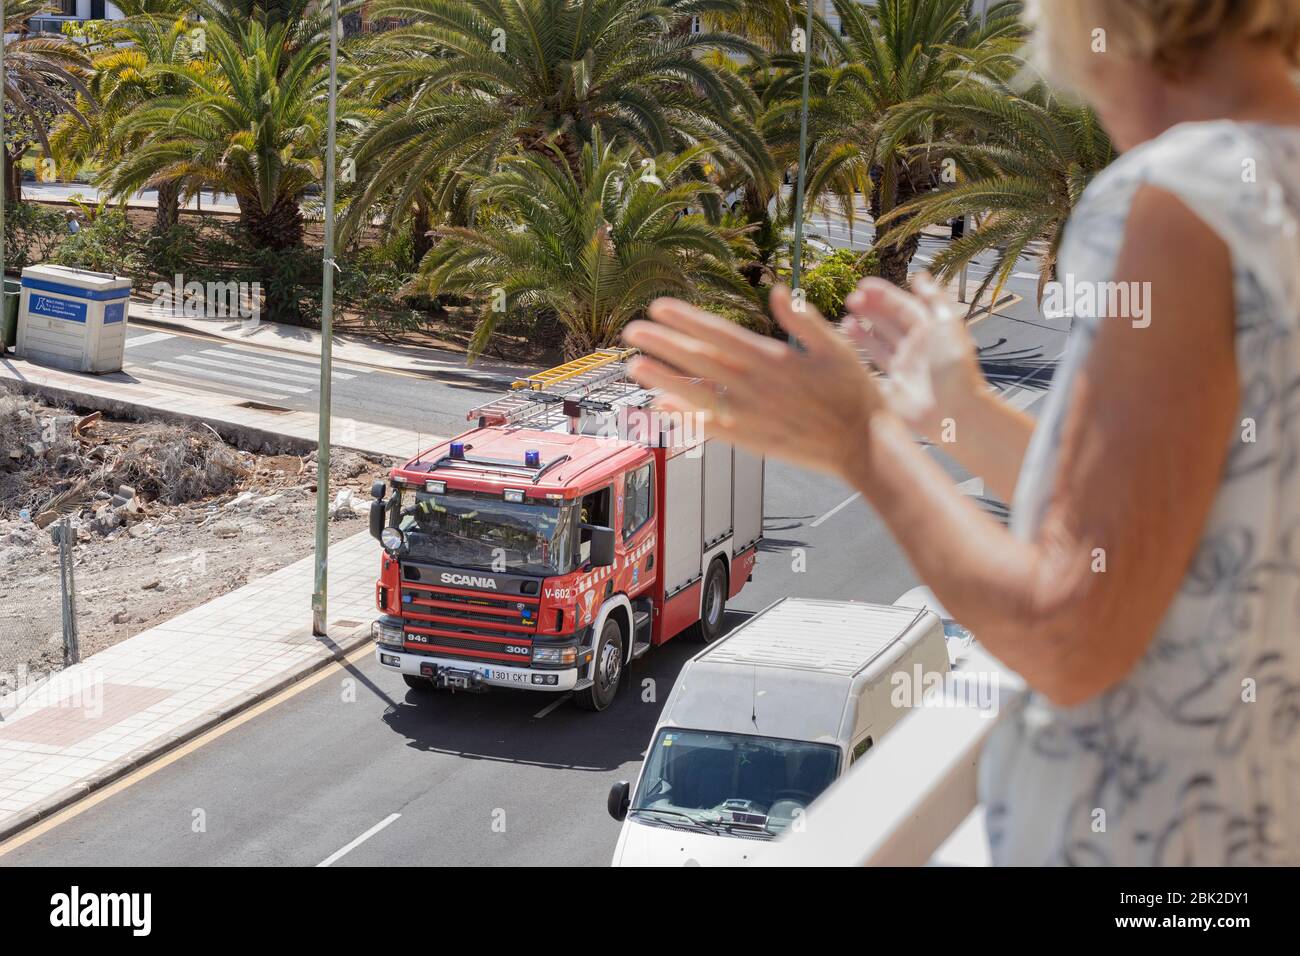 Clapping volunteer firemen driving through the village with sirens and lights flashing, state of emergency, Playa San Juan, Tenerife, Canary Islands Stock Photo